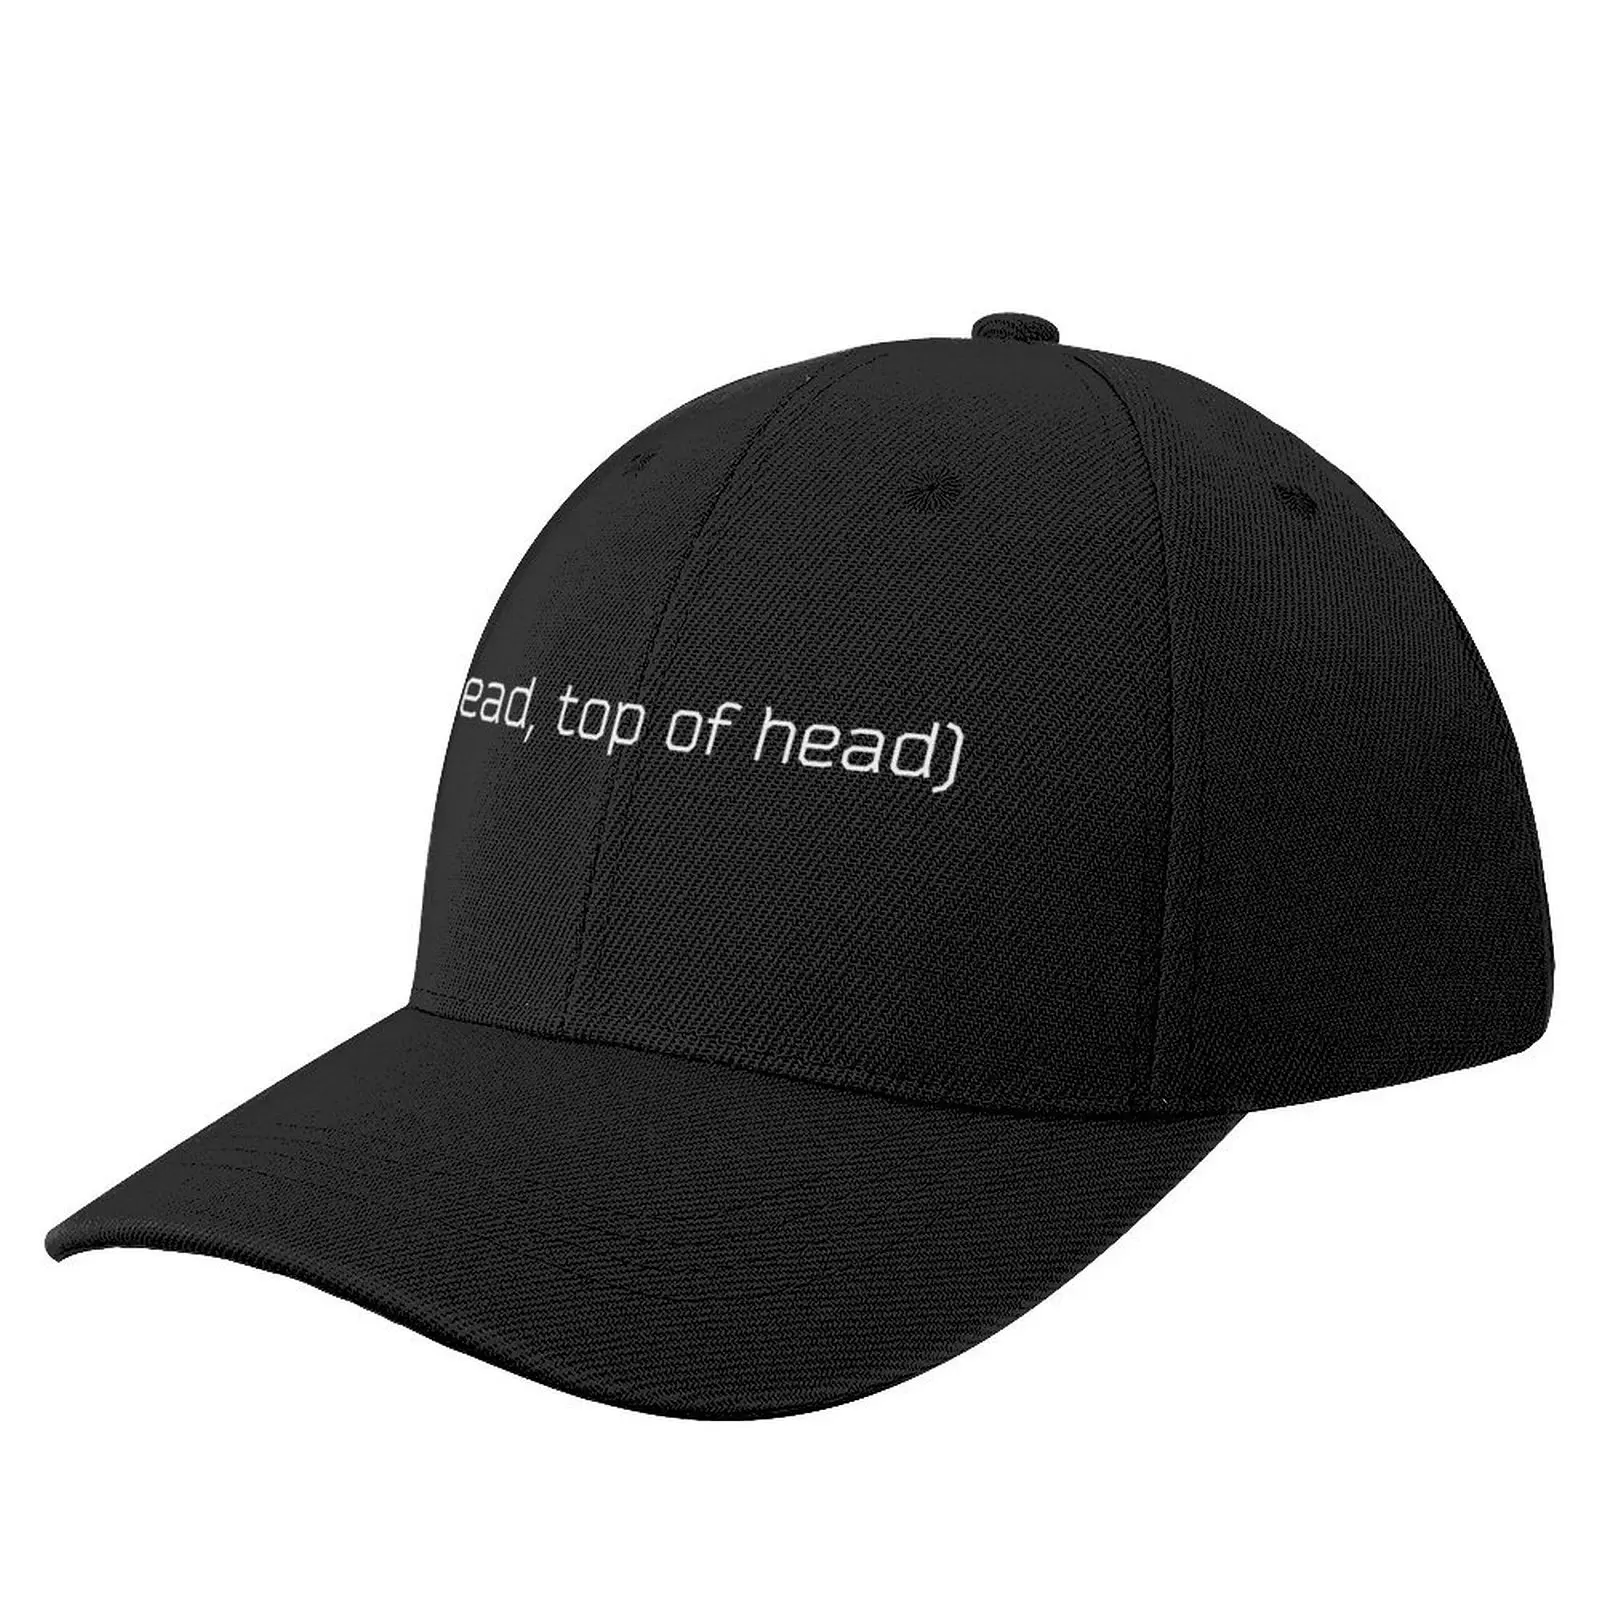 

(head, top of head) - Escape From Tarkov Baseball Cap fashionable summer hat Beach Outing For Women Men's